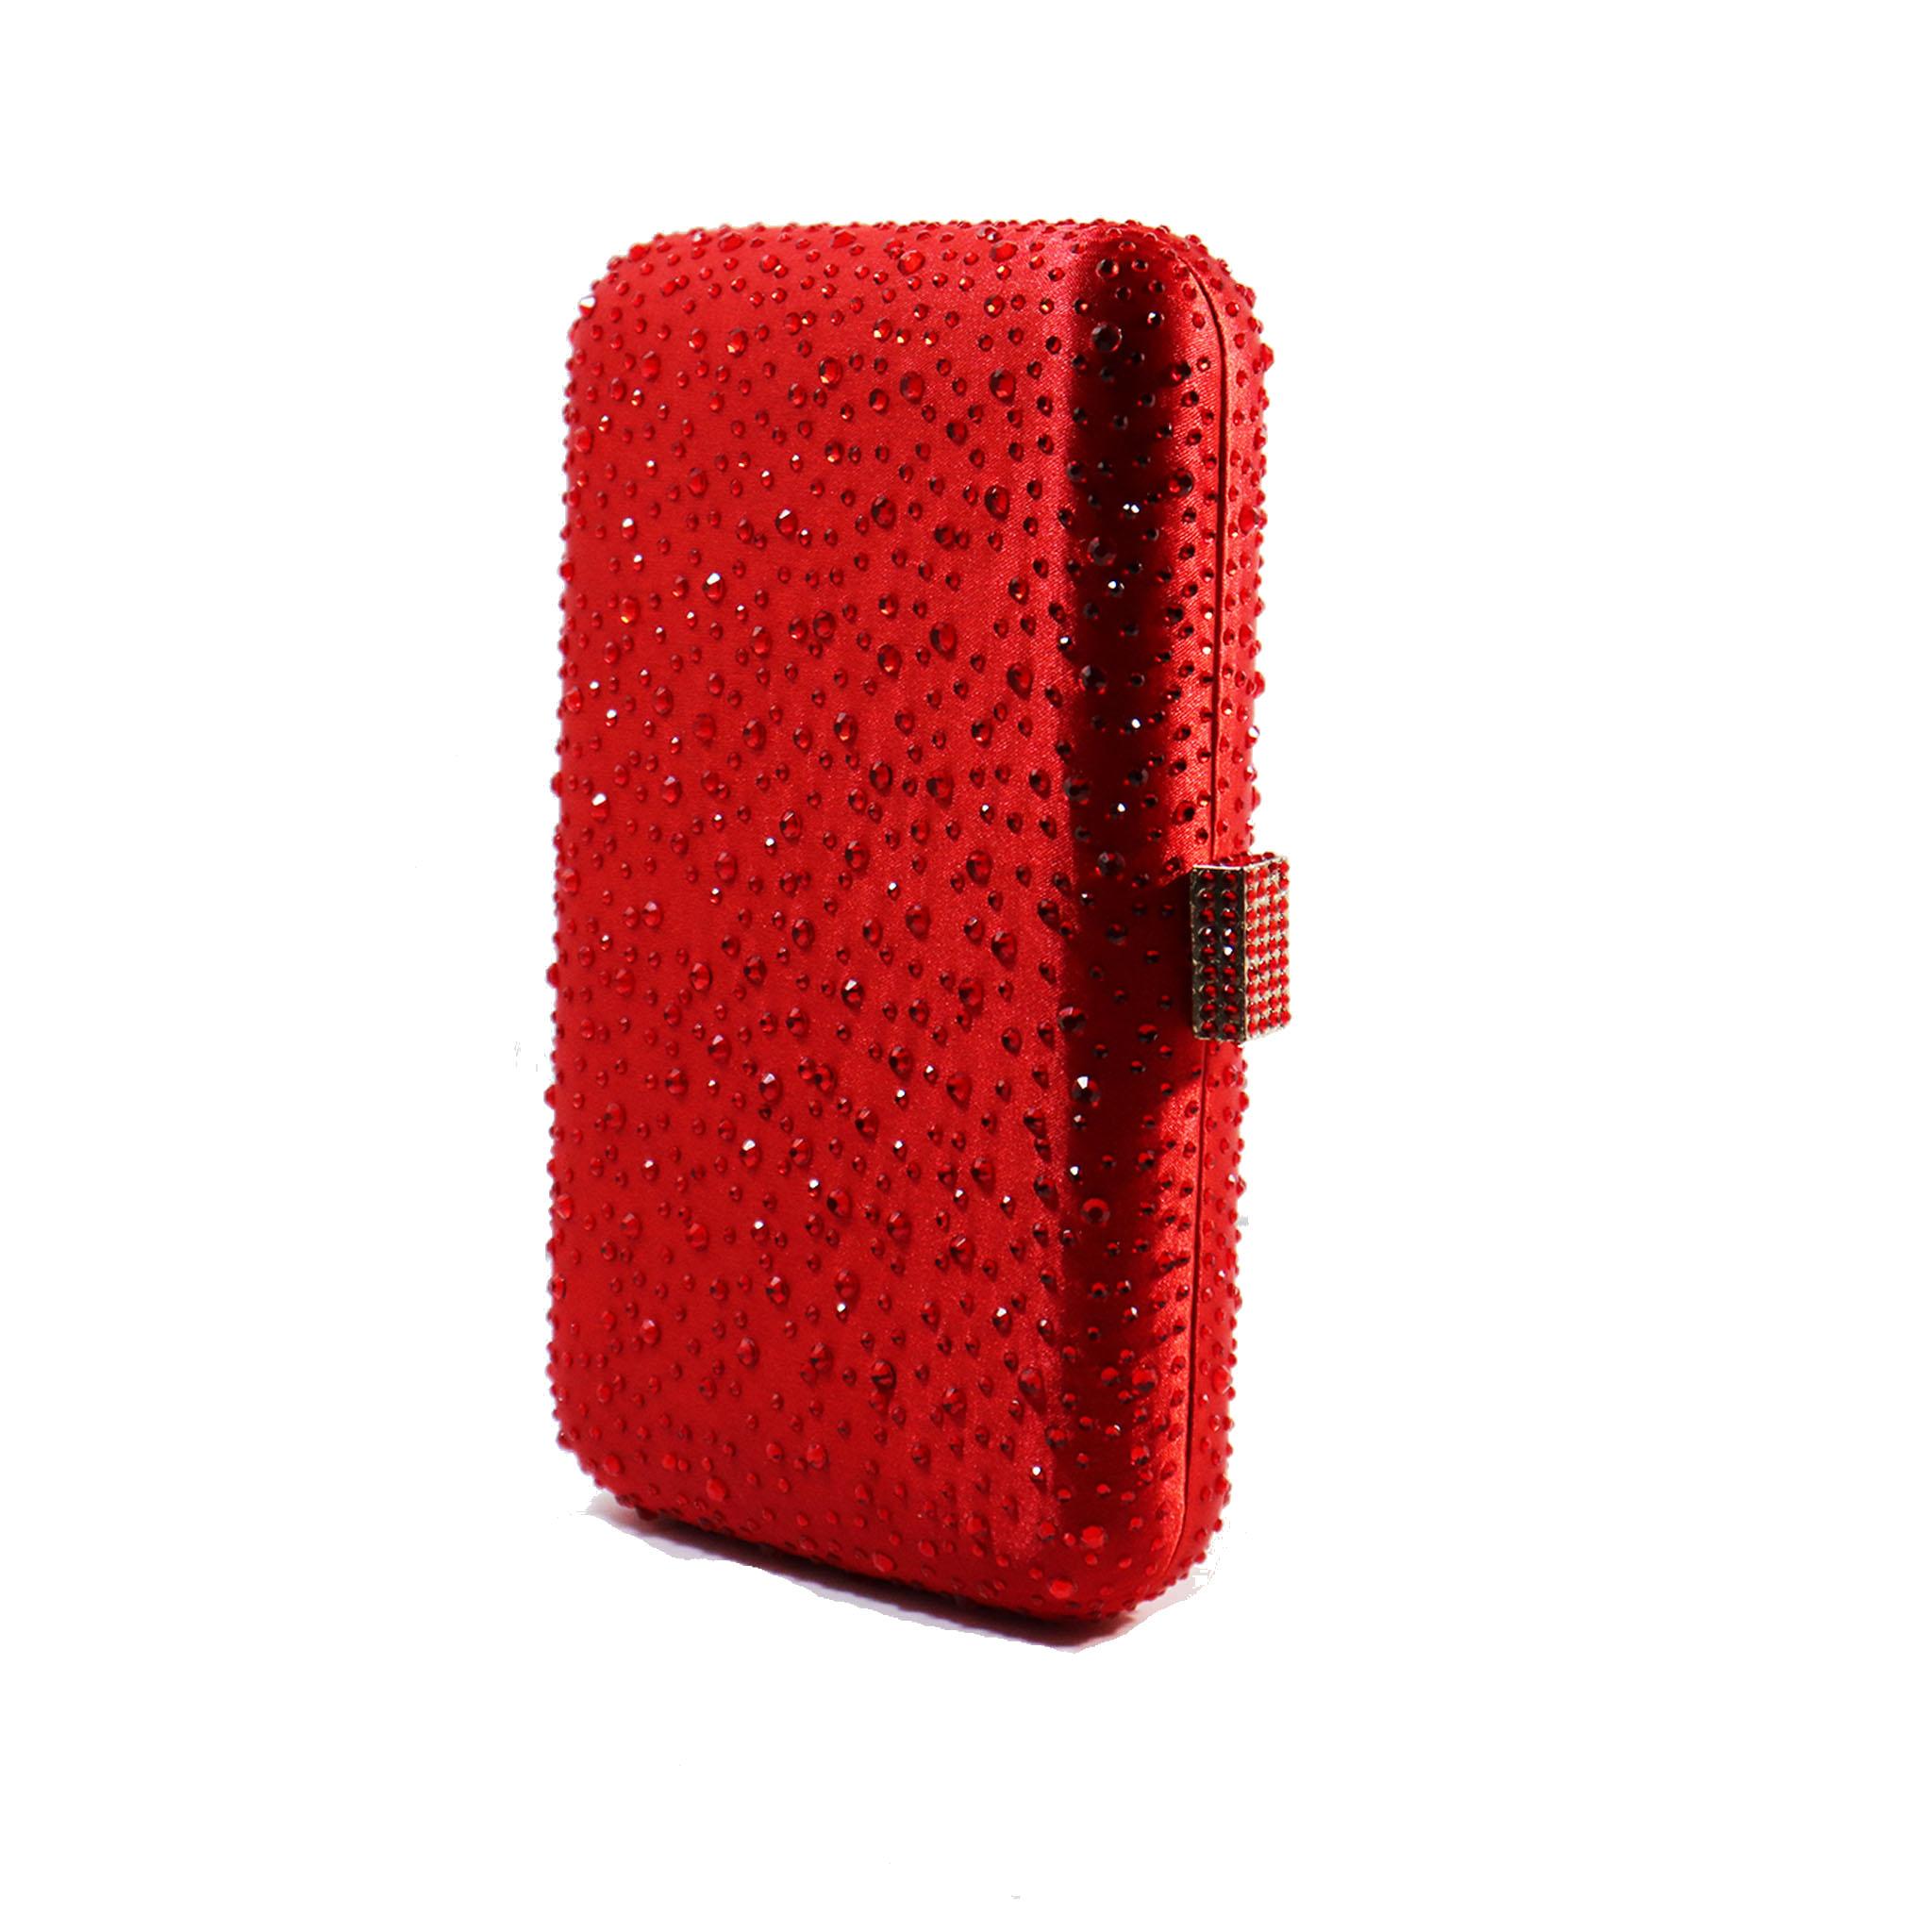 Small' Red Pave Rhinestone Evening Clutch with Crossbody Shoulder Chain 

Mesures : 
Longueur : 8 cm.
Largeur :  2 in.
Hauteur : 5 pouces. 